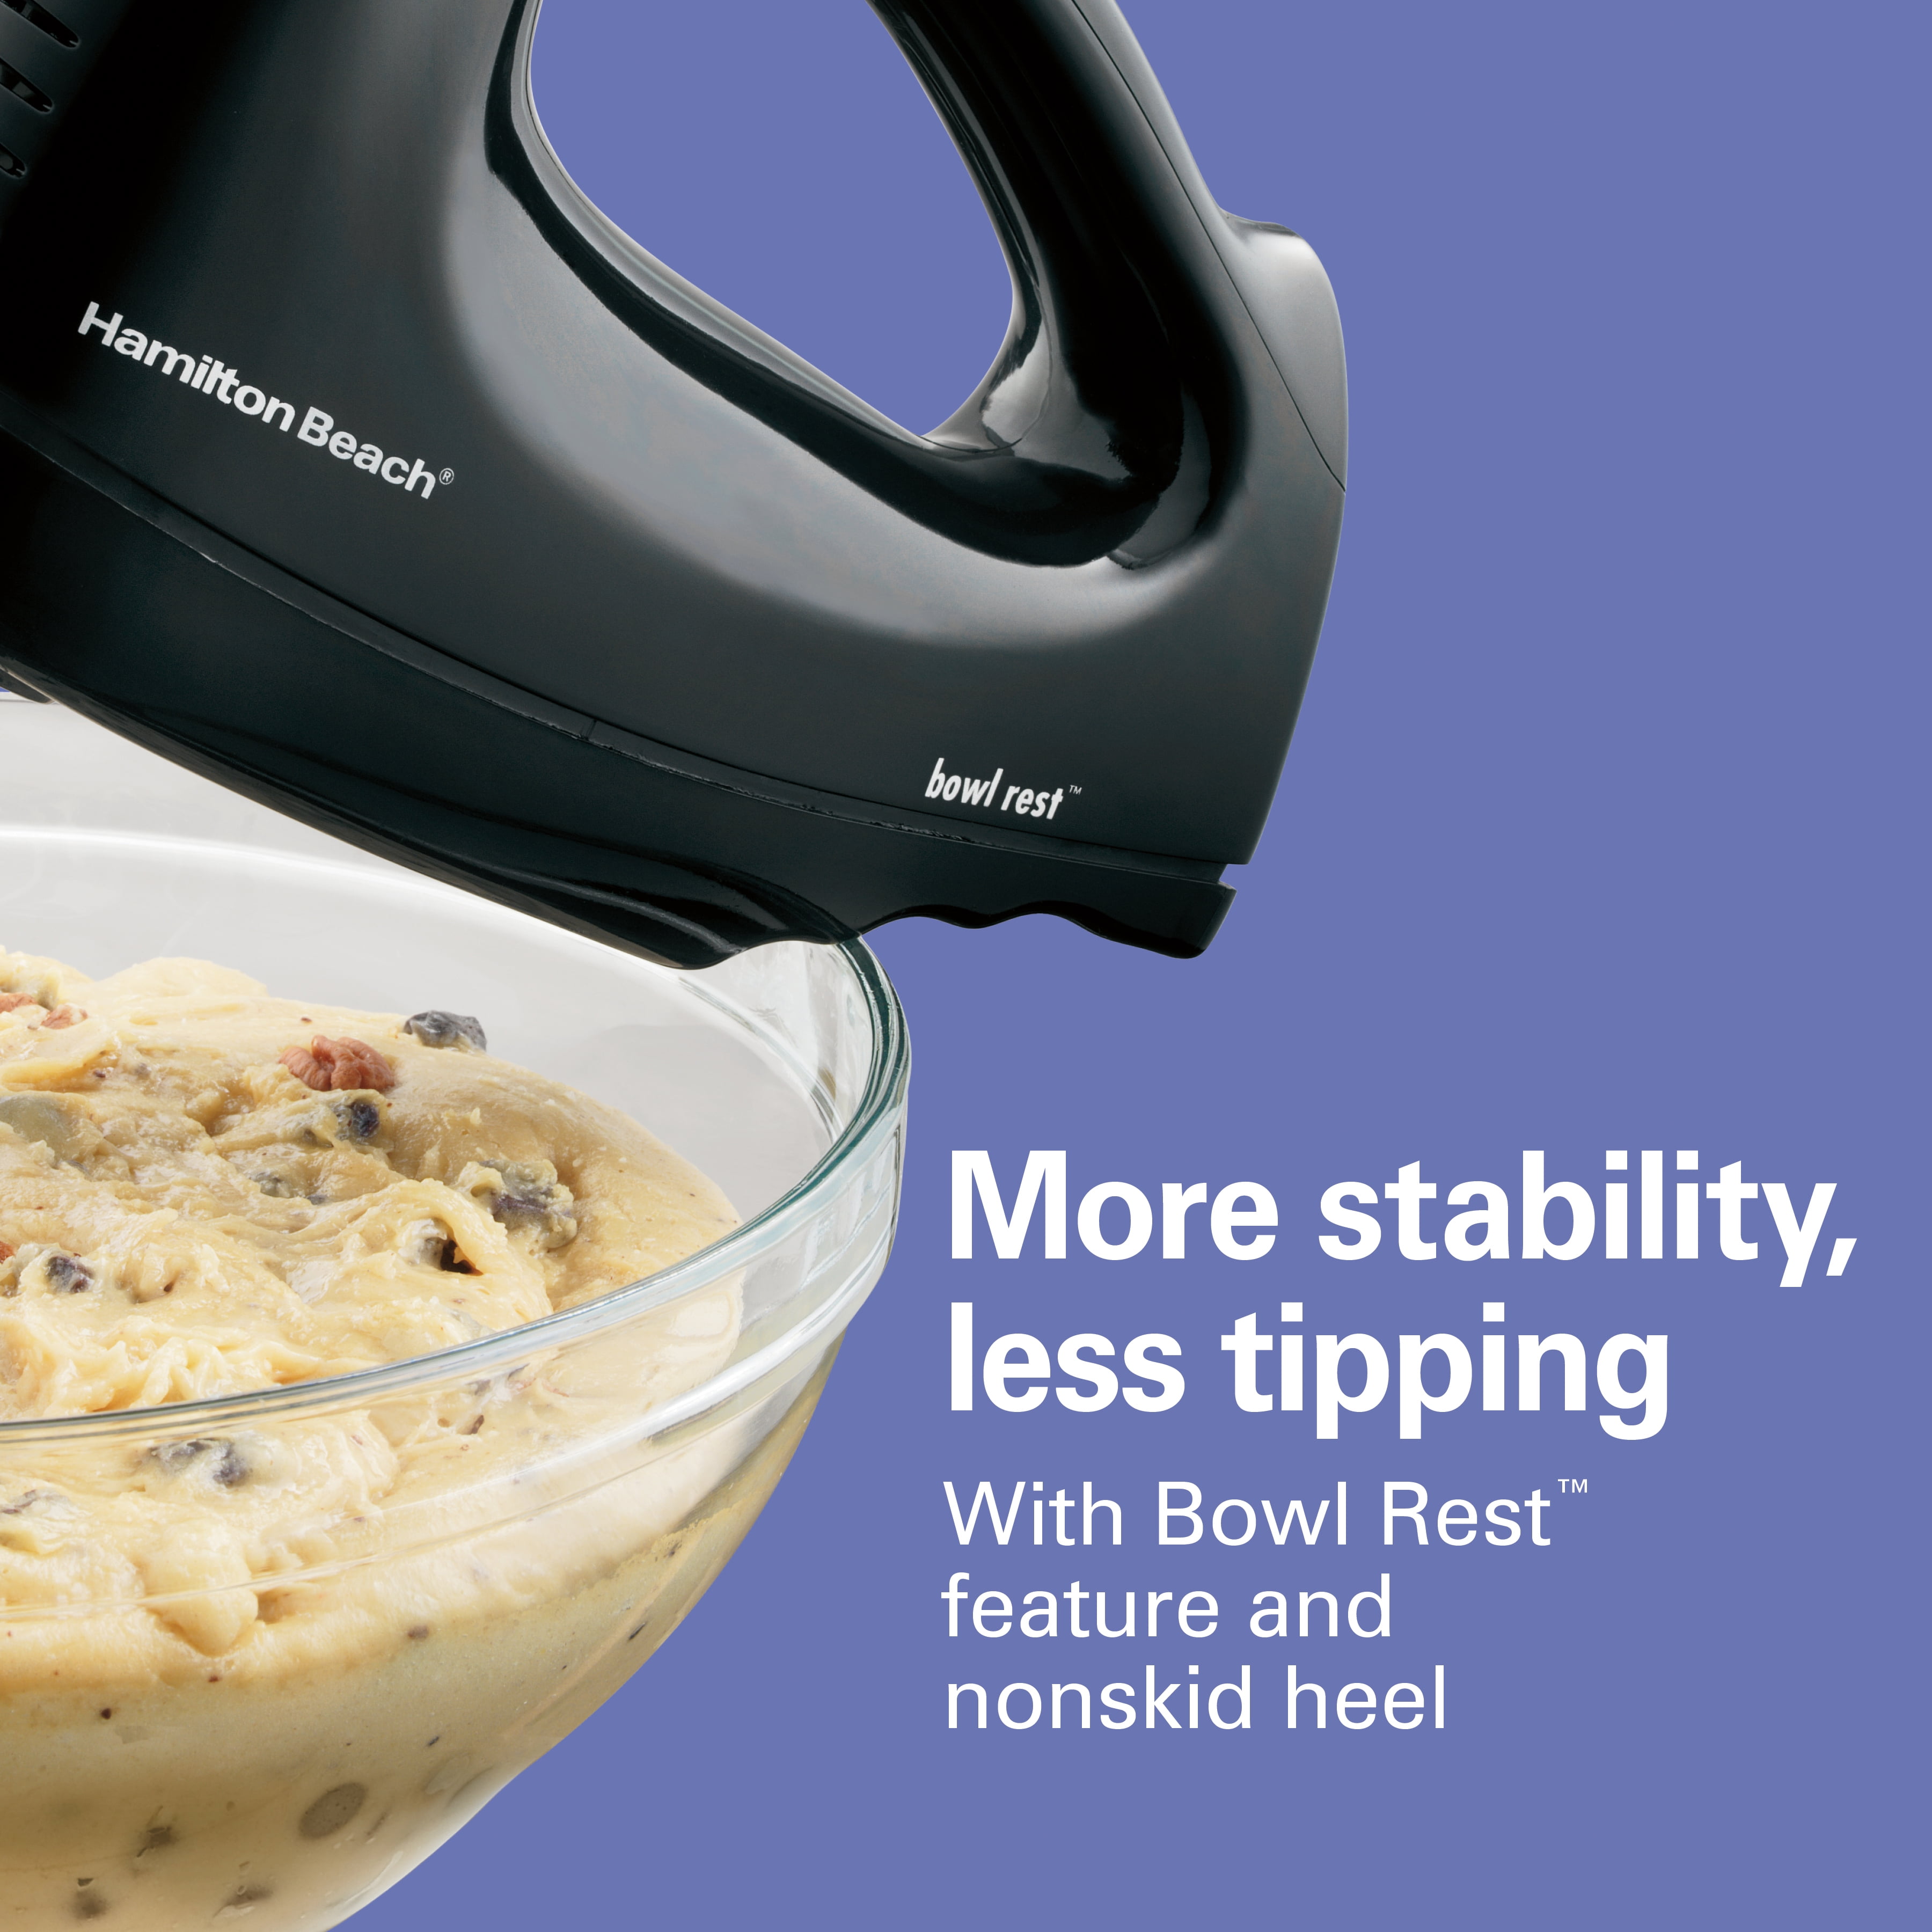 Hamilton Beach 6-Speed Black Hand Mixer with Snap-On Case 62620 - The Home  Depot